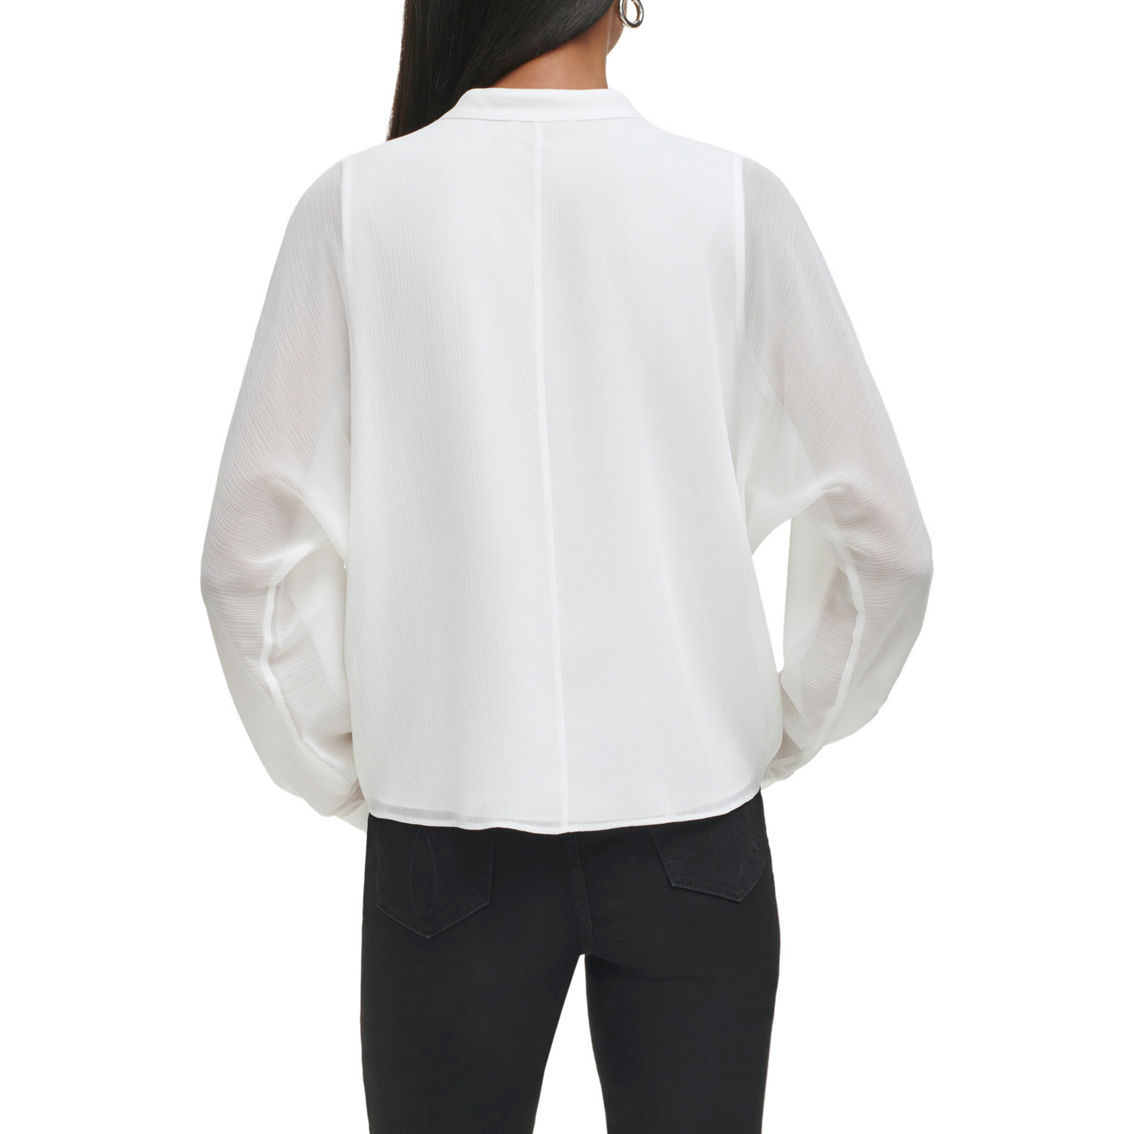 Calvin Klein Crinkle Chiffon Button Front Notch Collar Blouse - Image 2 of 4